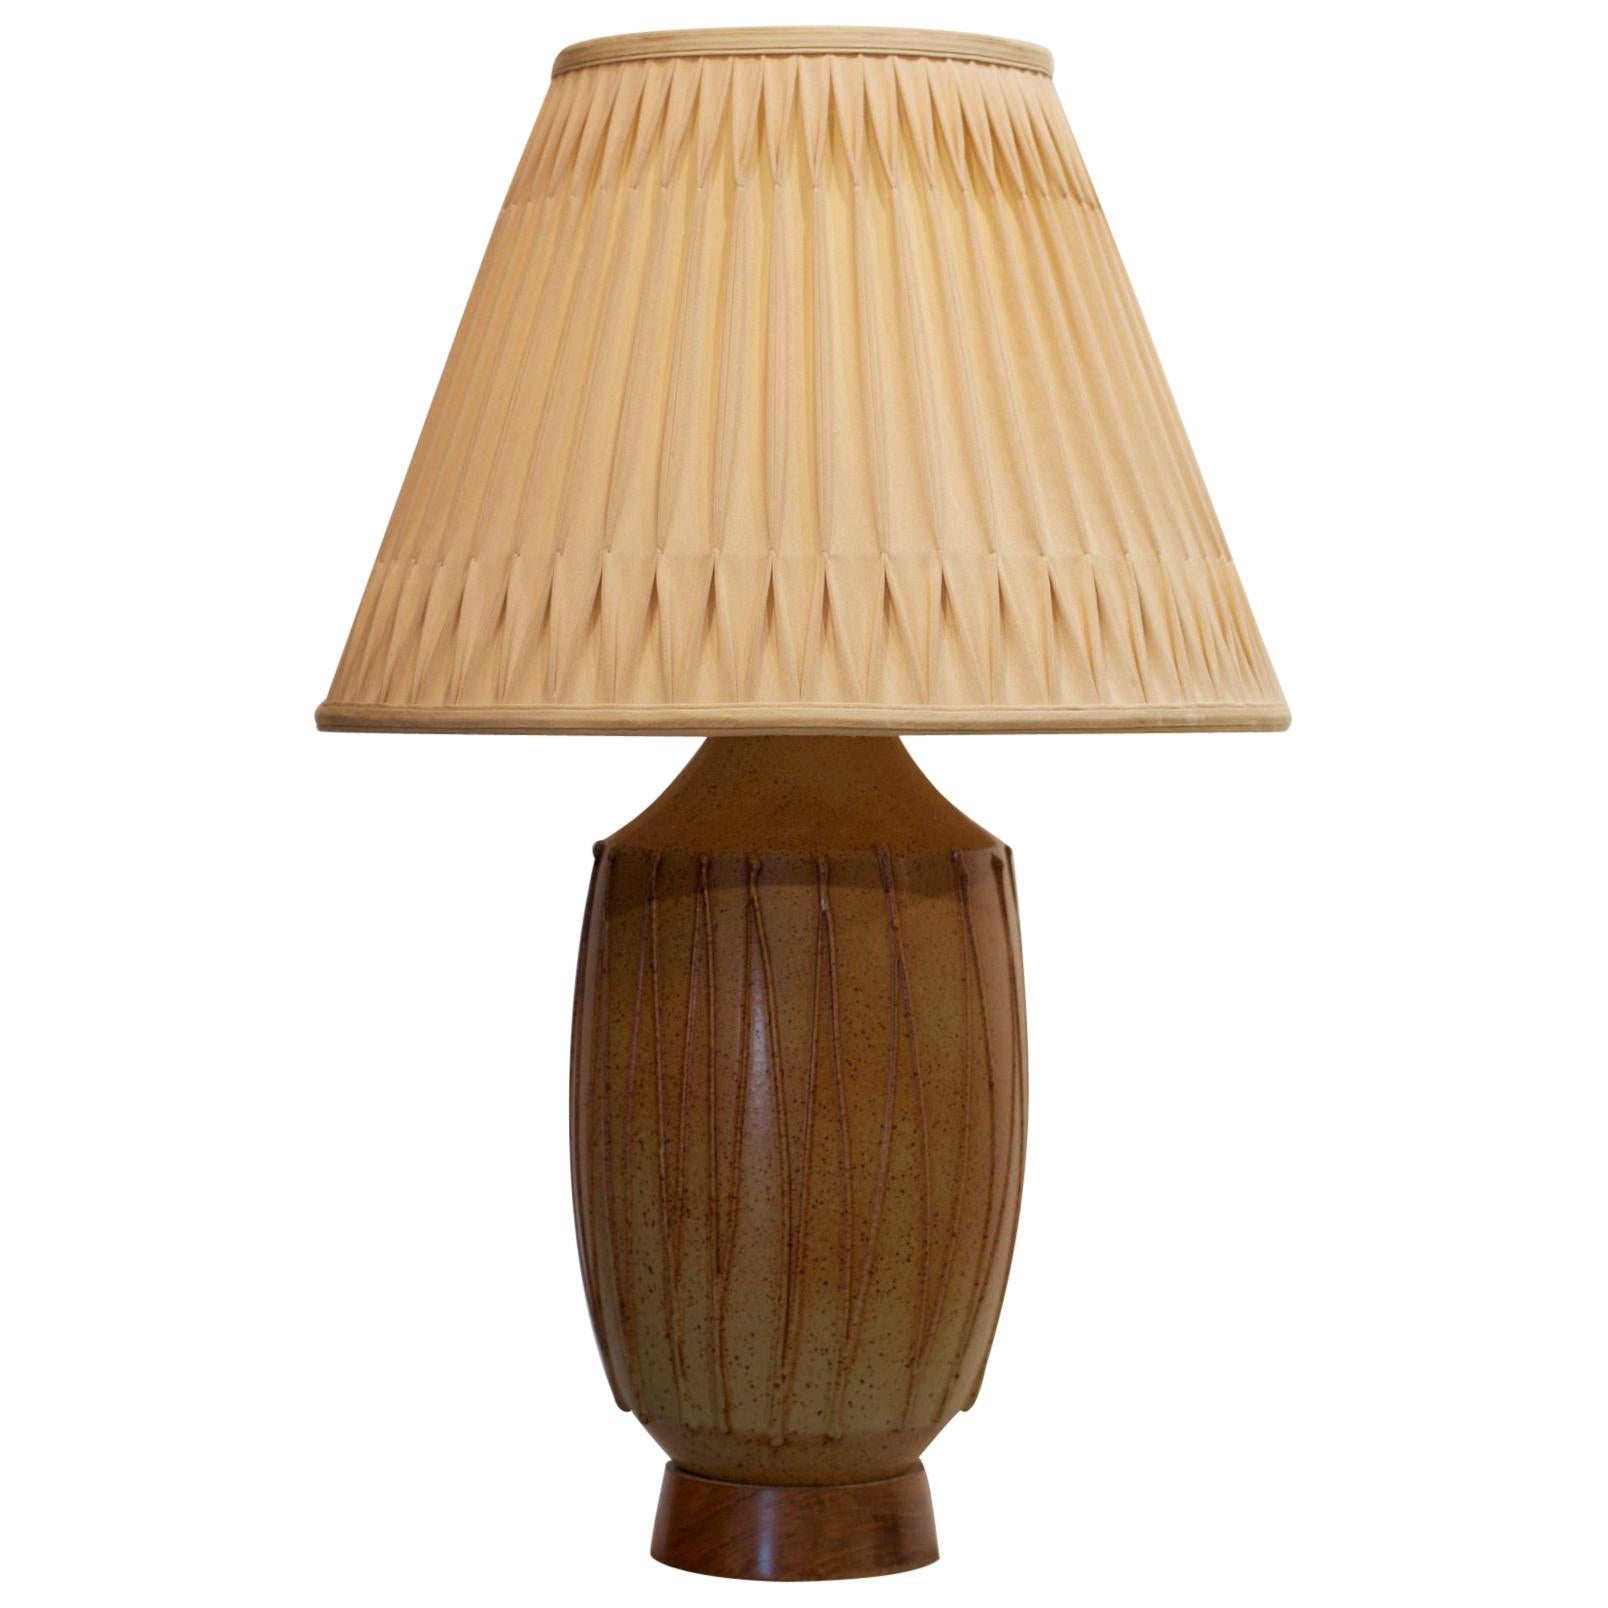 A handsome pottery lamp by esteemed California potter David Cressey, (1916-2013) for Architectural Pottery of California. The form is smart and classic with a speckled brown glaze over a light ochre base. All applied string glaze work is intact and